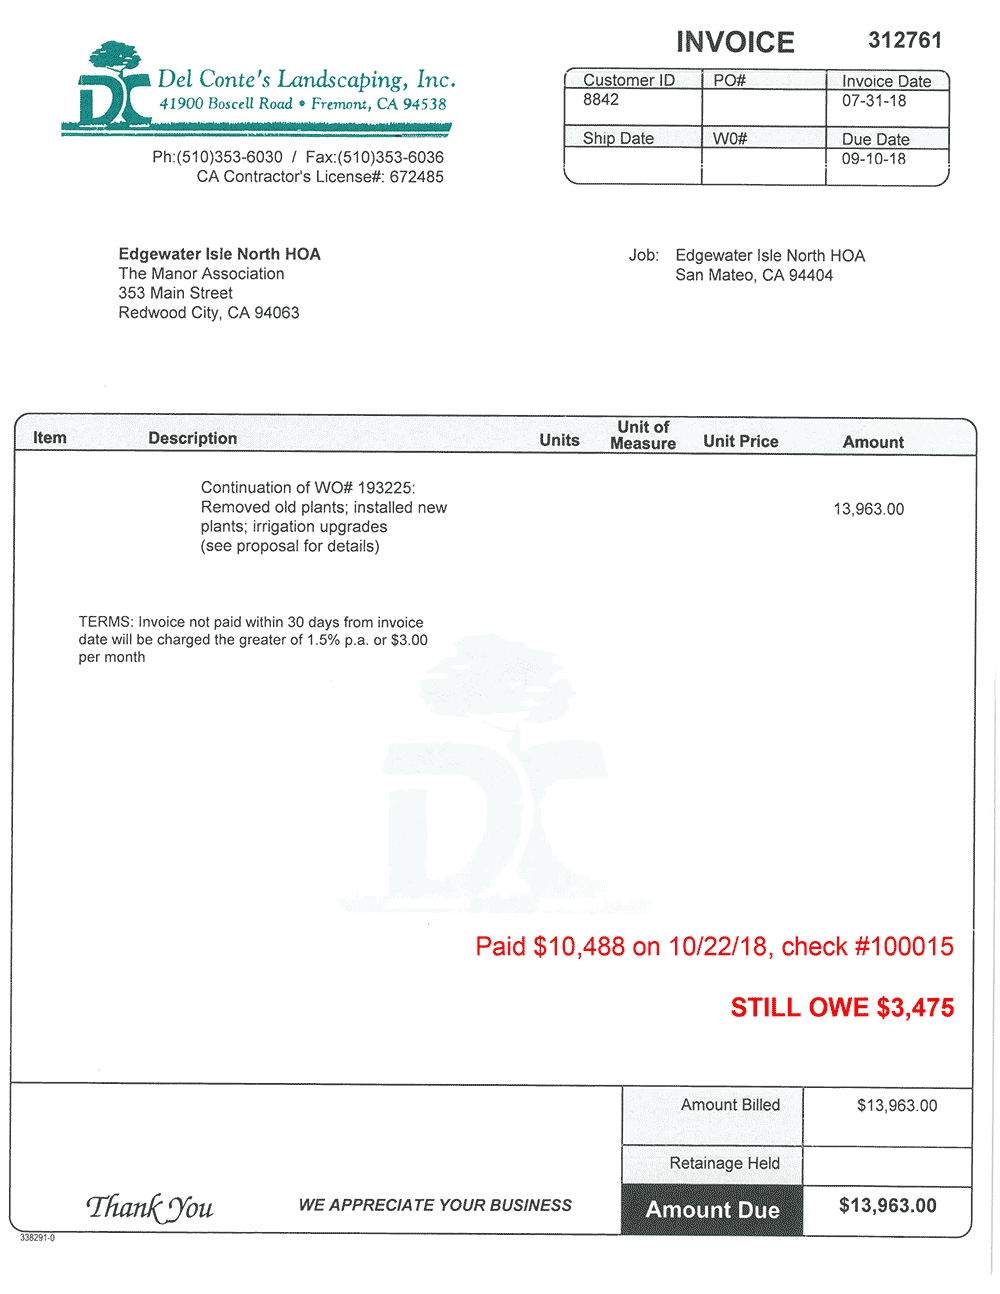 Del Conte's Landscaping has alleged that Edgewater Isle has not paid this invoice, which was due on September 10, 2018